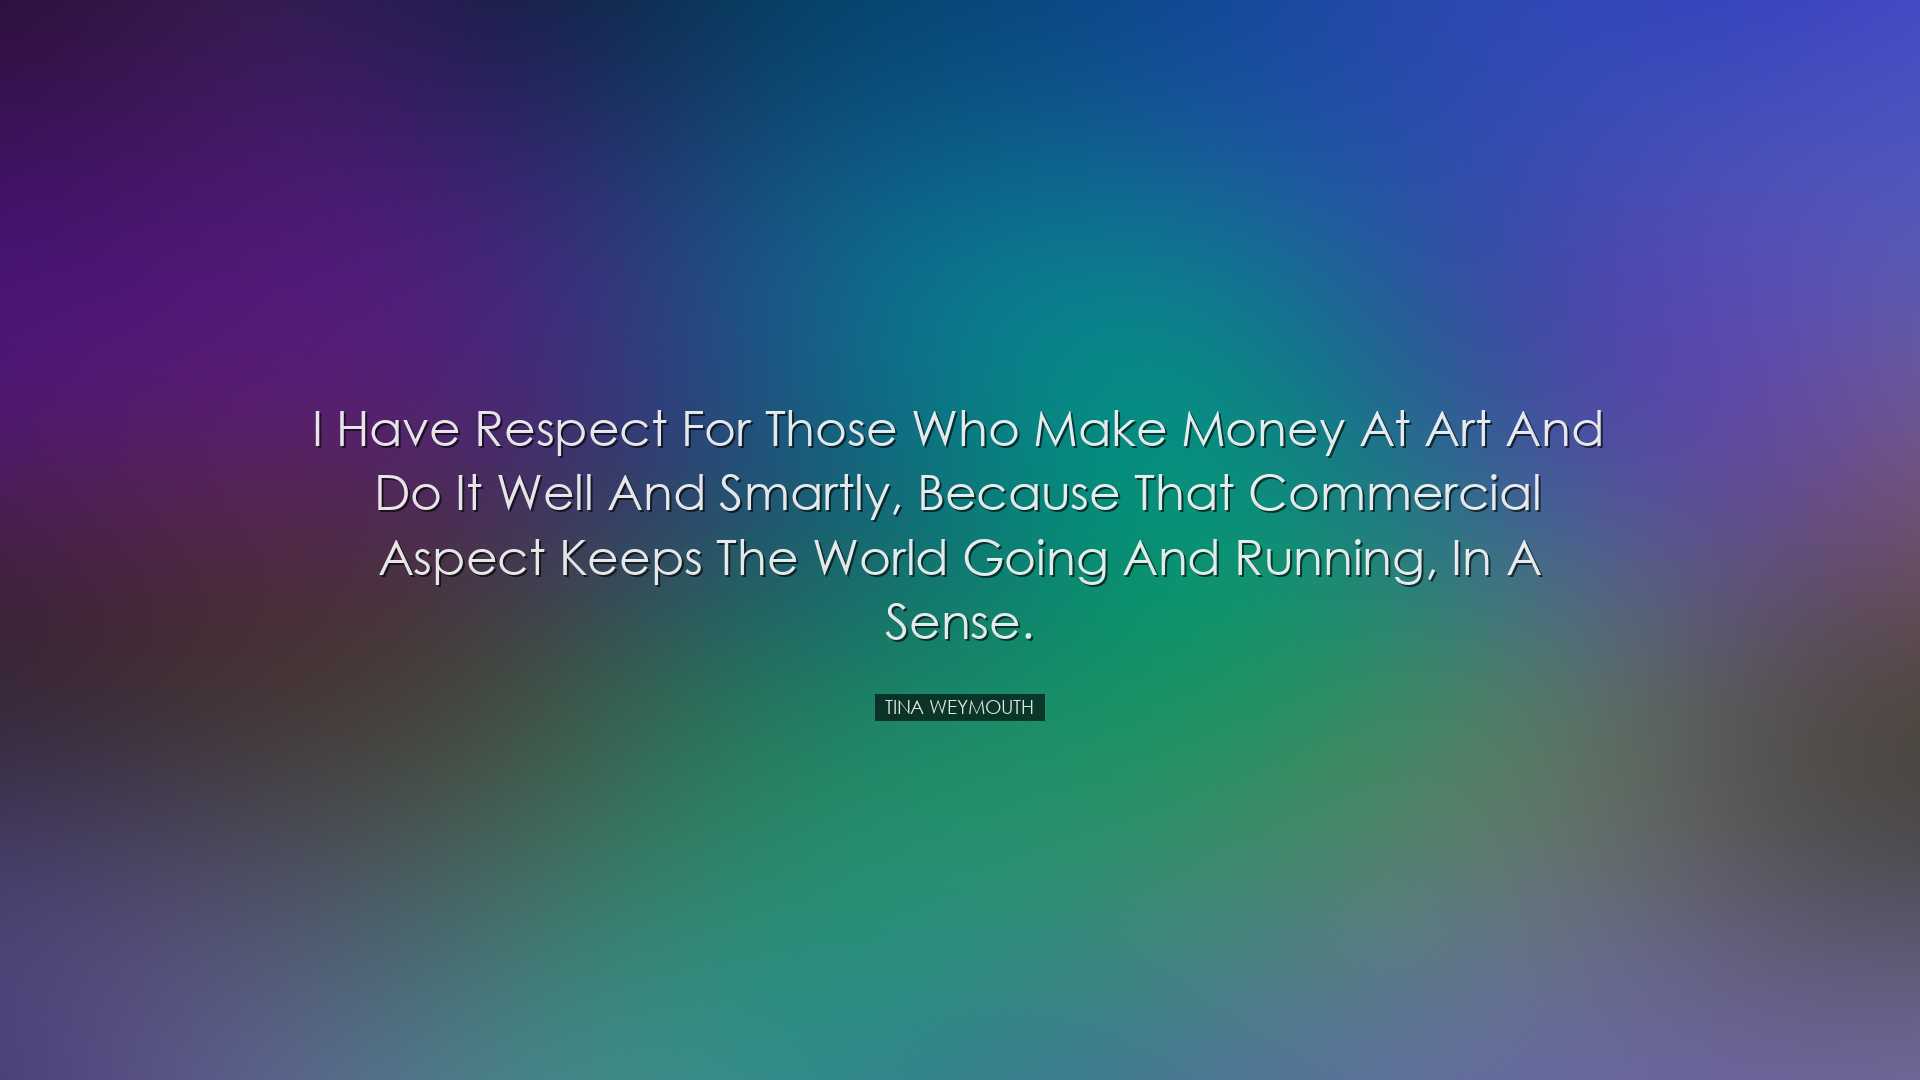 I have respect for those who make money at art and do it well and